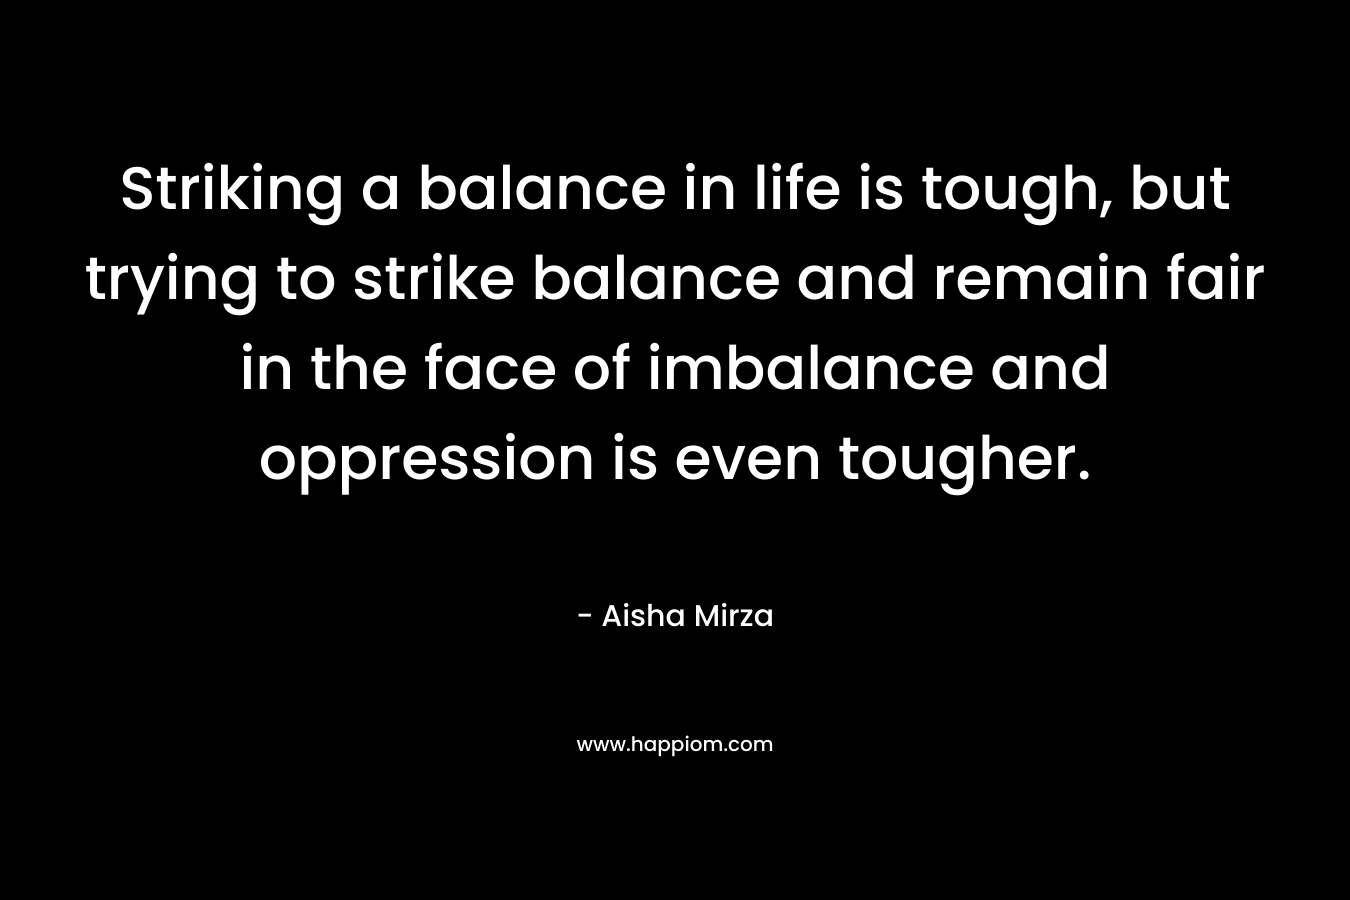 Striking a balance in life is tough, but trying to strike balance and remain fair in the face of imbalance and oppression is even tougher.